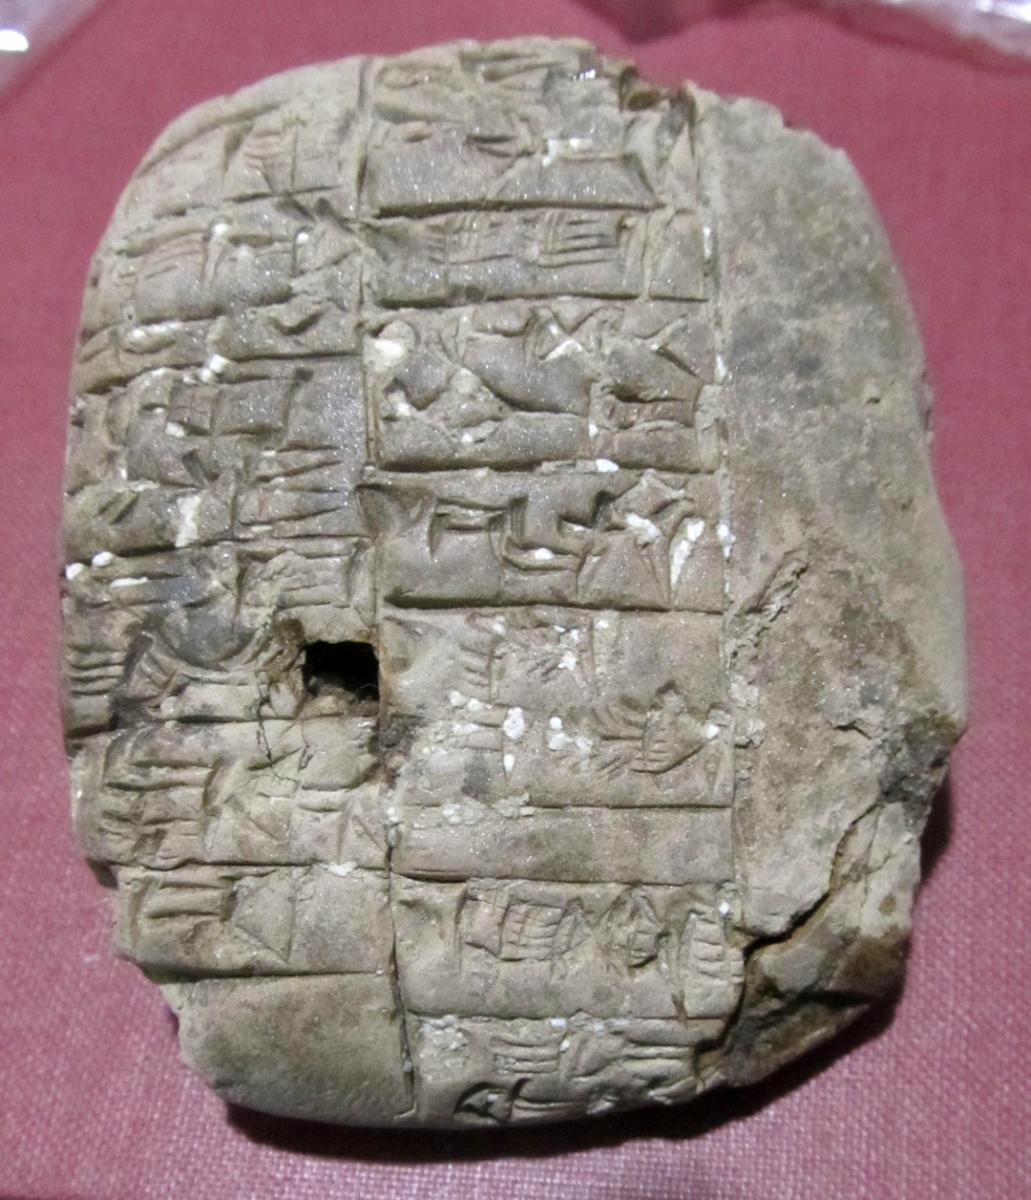 Cuneiform tablet, Early Dynastic period 